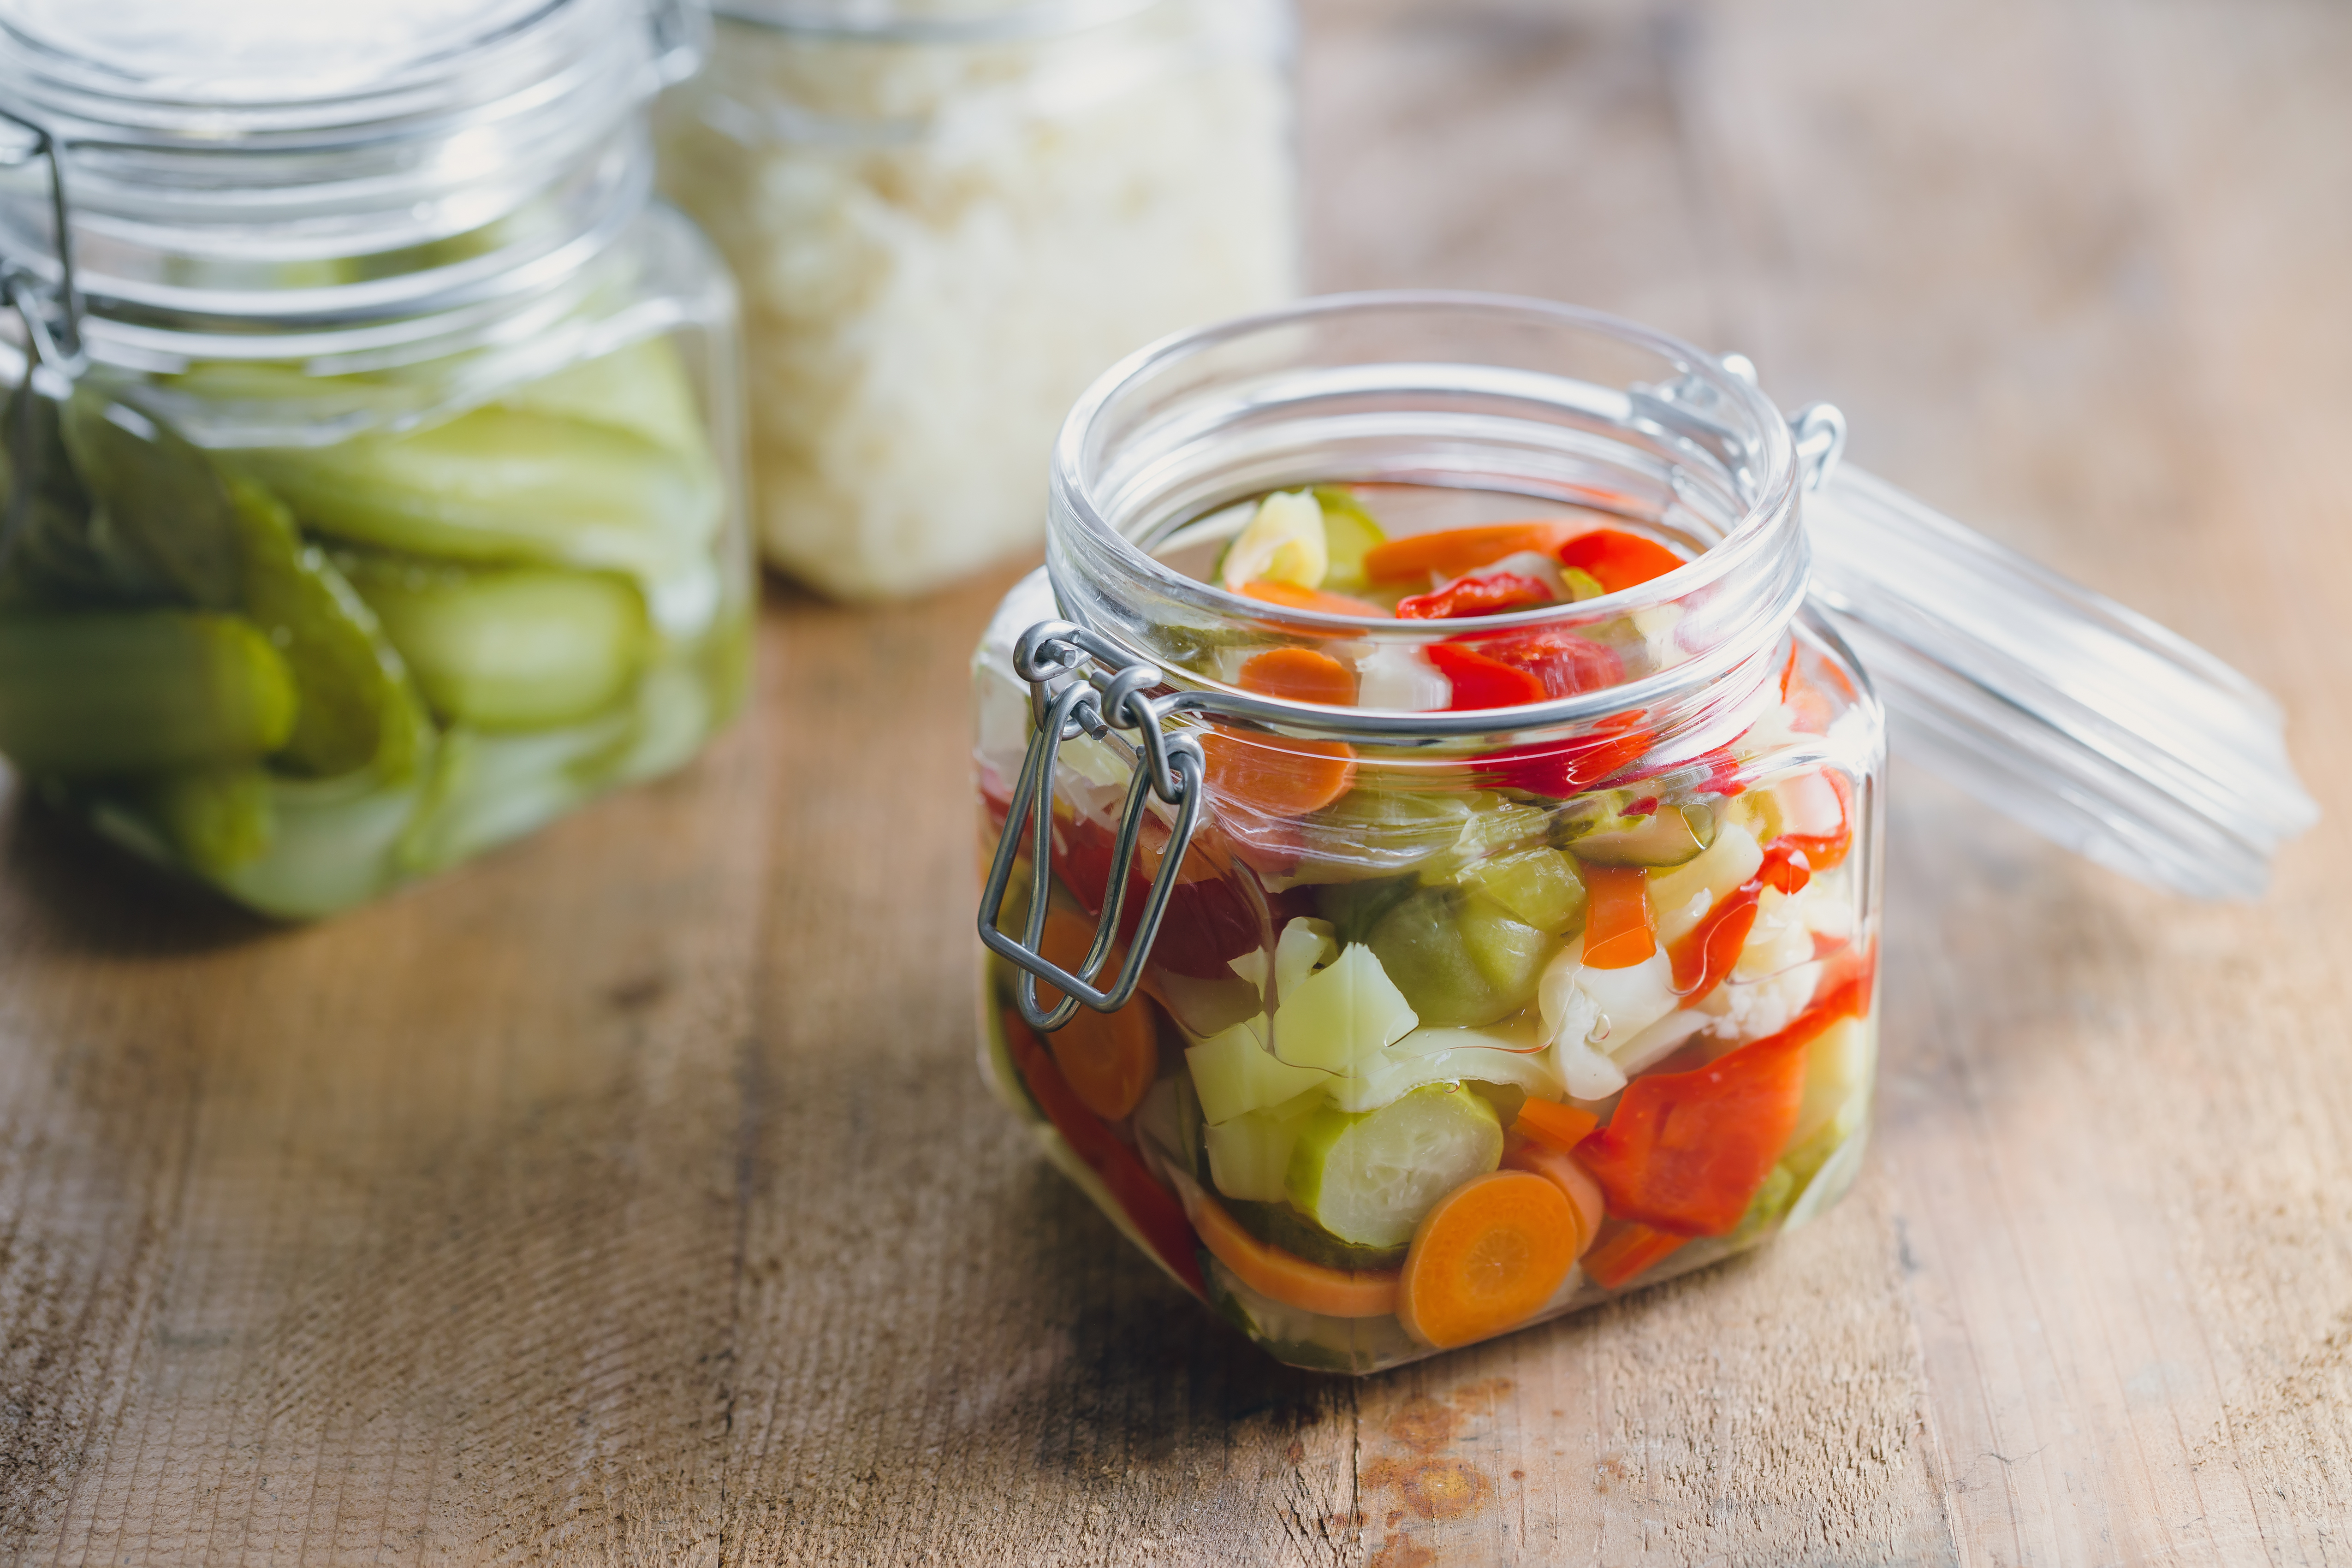 This Boxing Day, Have an Extra Helping of Pickled Vegetables